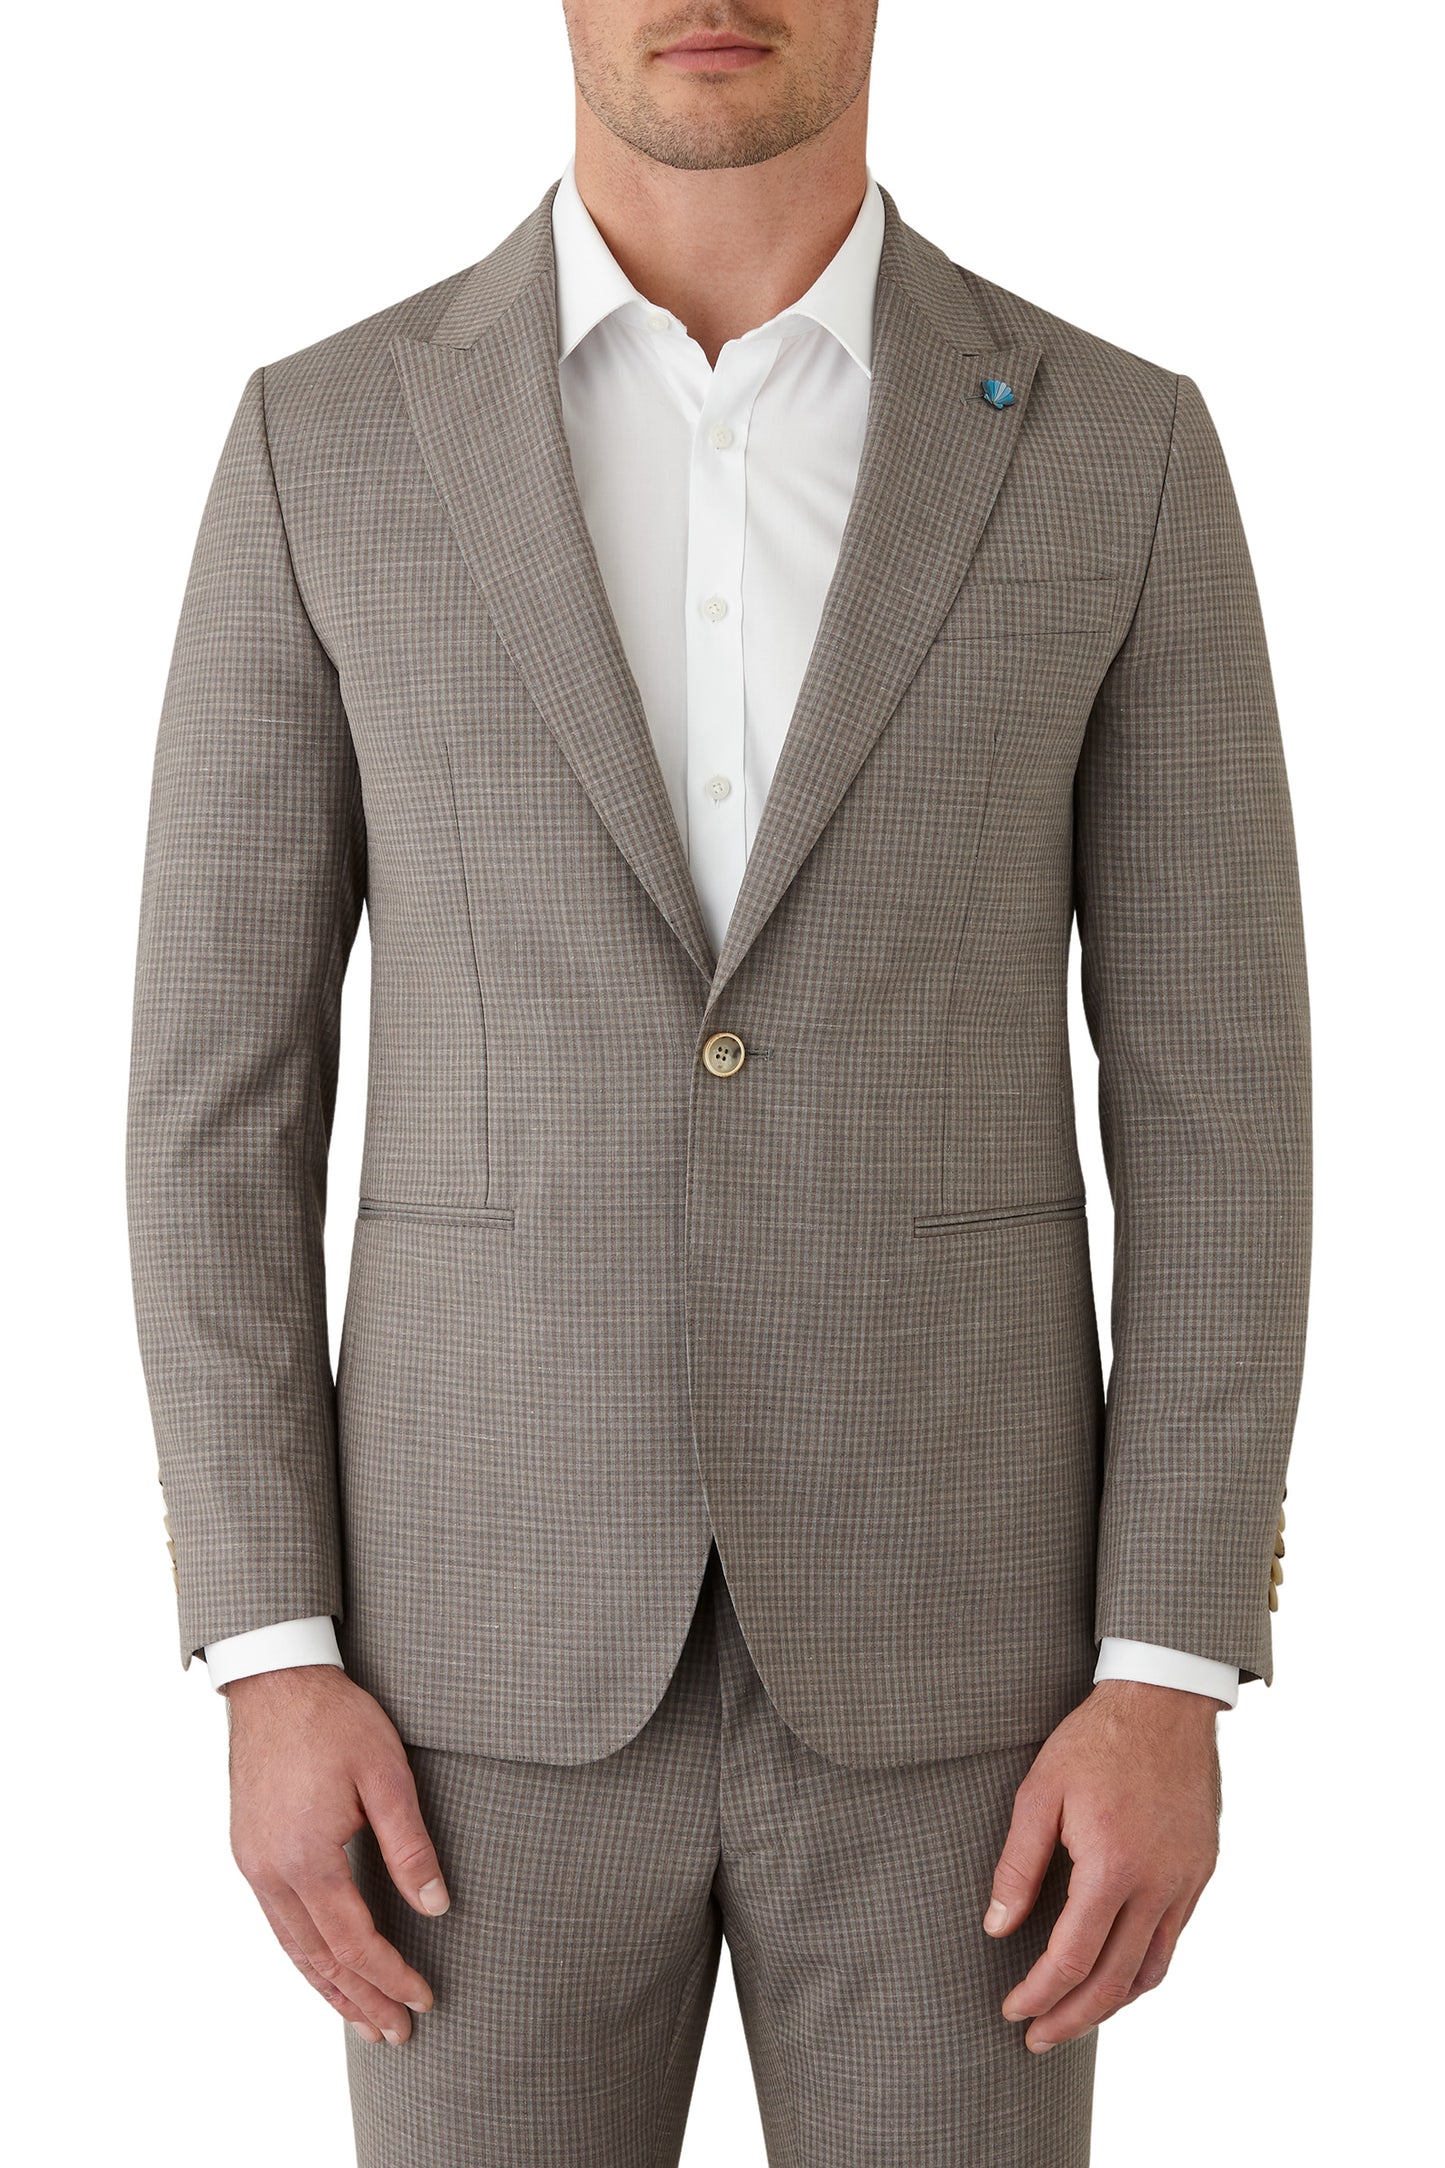 Gibson - Ionic/Caper Suit - Taupe Check